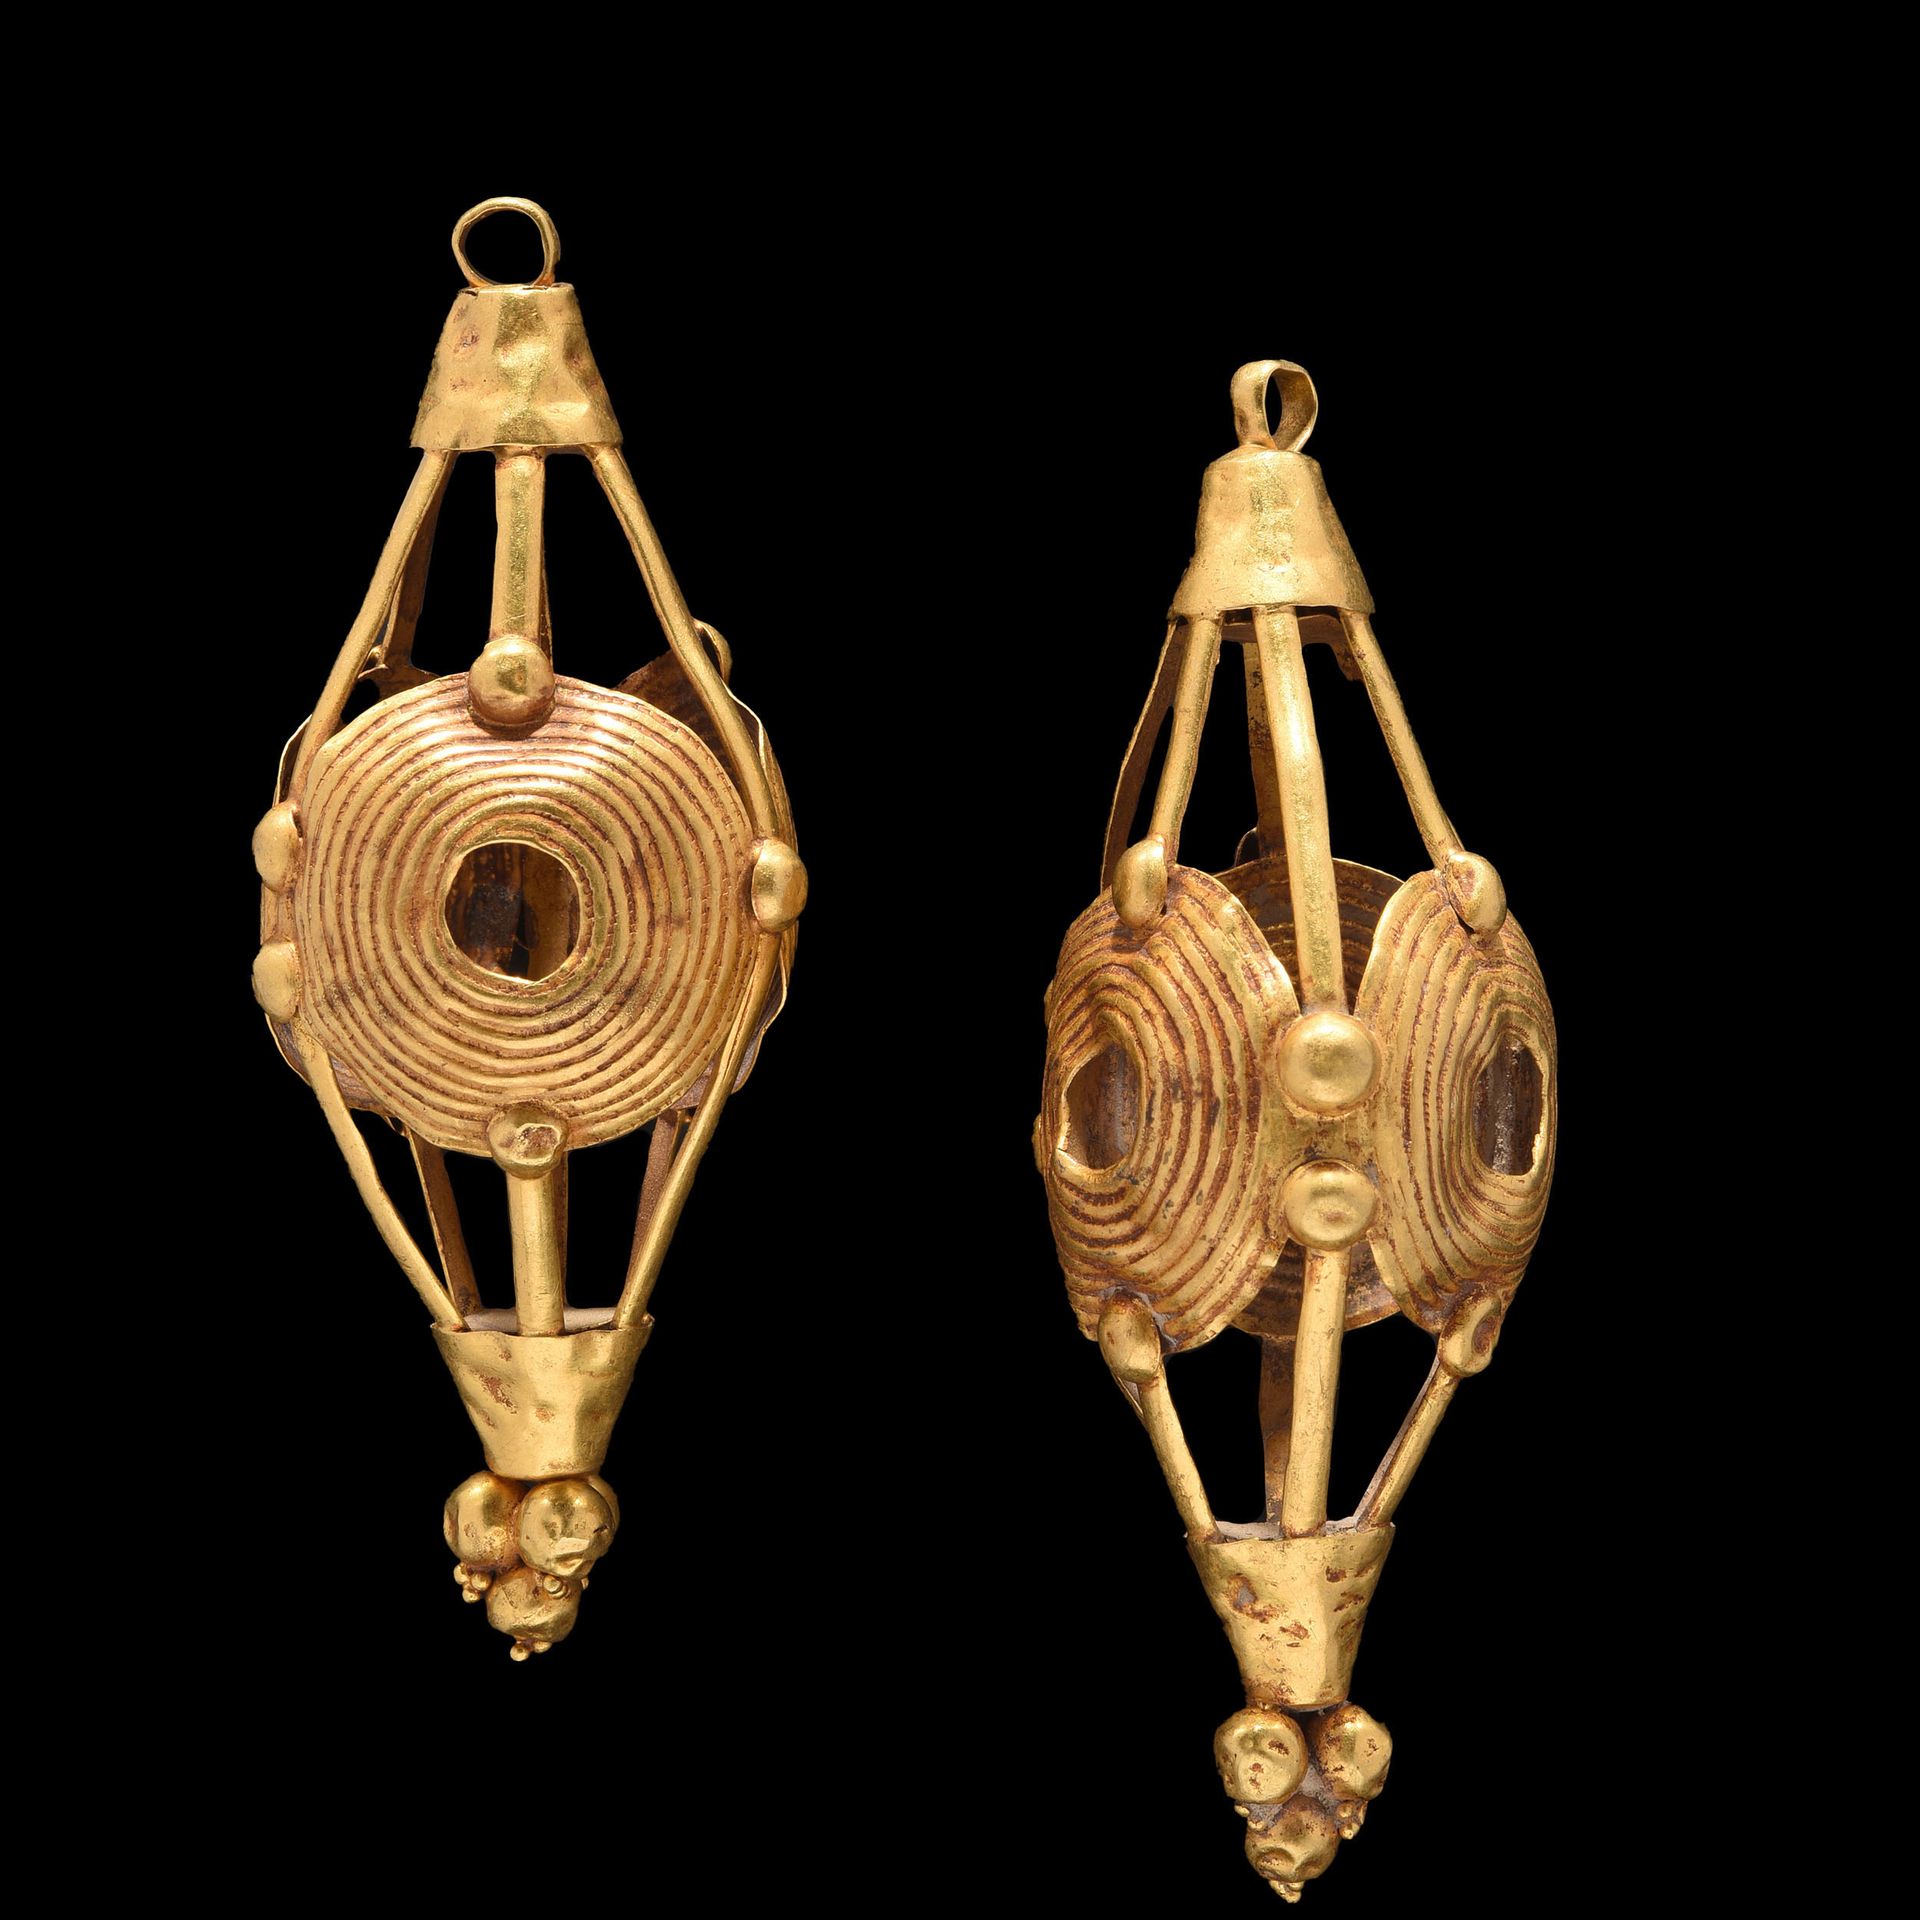 Null PAIR OF EARRINGS

Late Eastern Mediterranean or later.

Made of gilded copp&hellip;